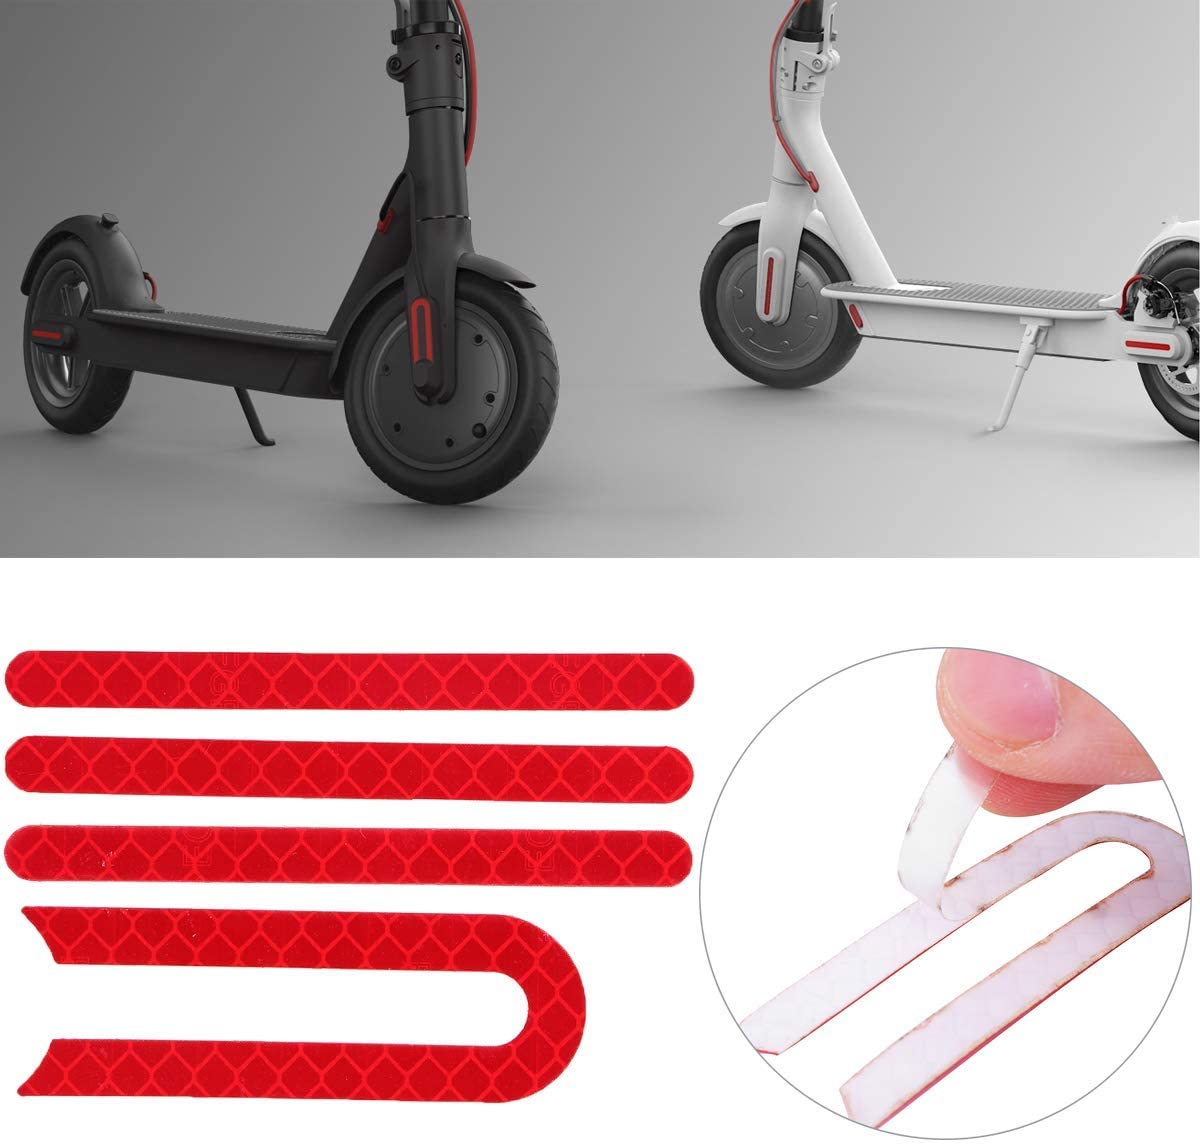 GLDYTIMES Reflective Strip Film Frame Pedal Sticker and Front & Rear Wheel Waterproof Sticker for Xiaomi Mijia M365 Electric Scooter